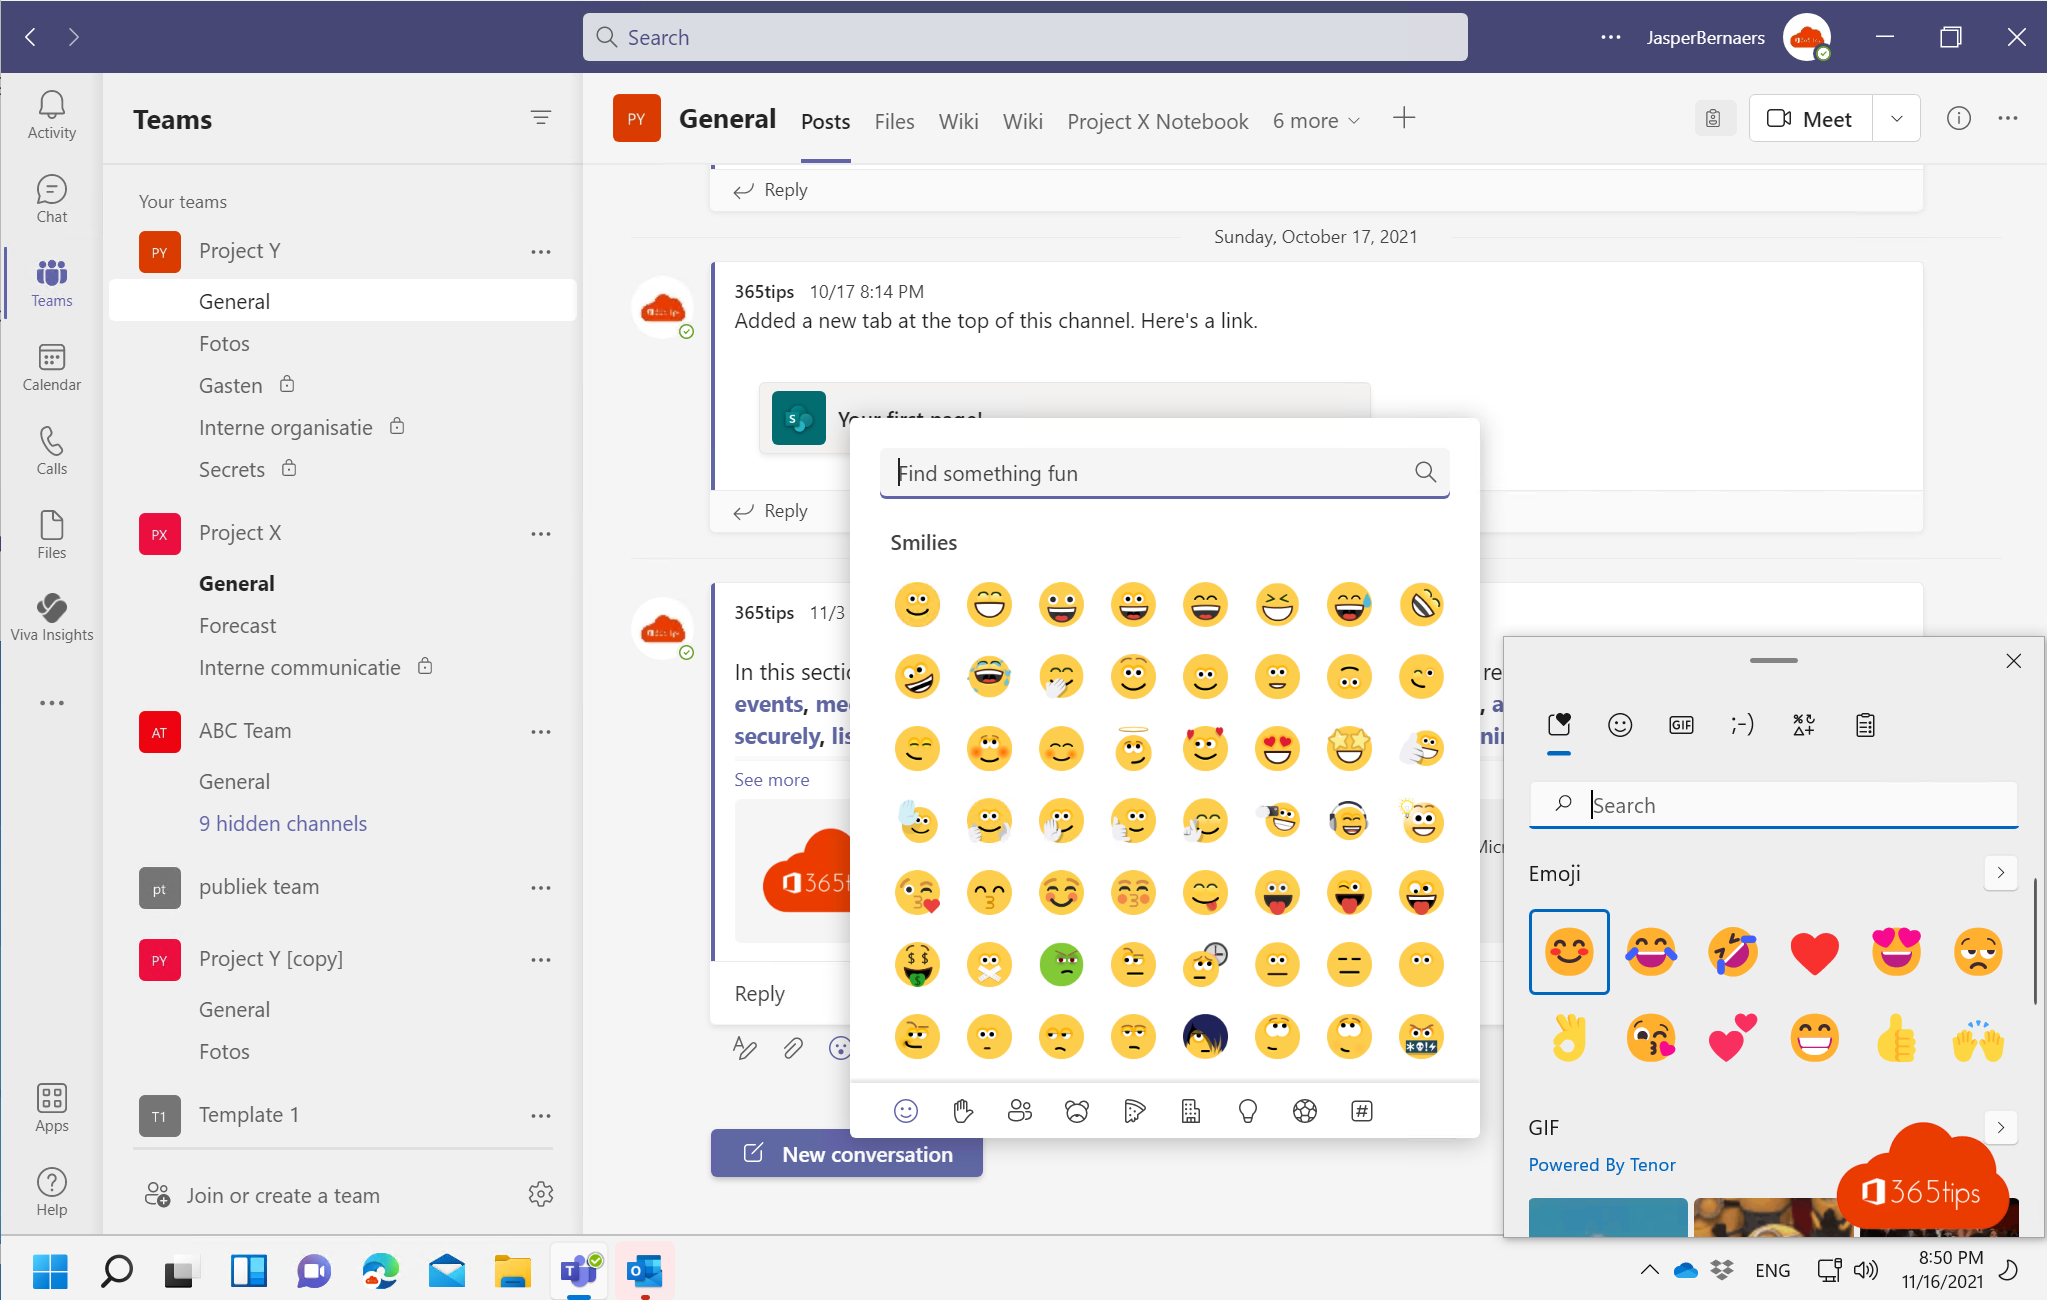 Emoji support in Outlook, Windows 11 and Microsoft Teams